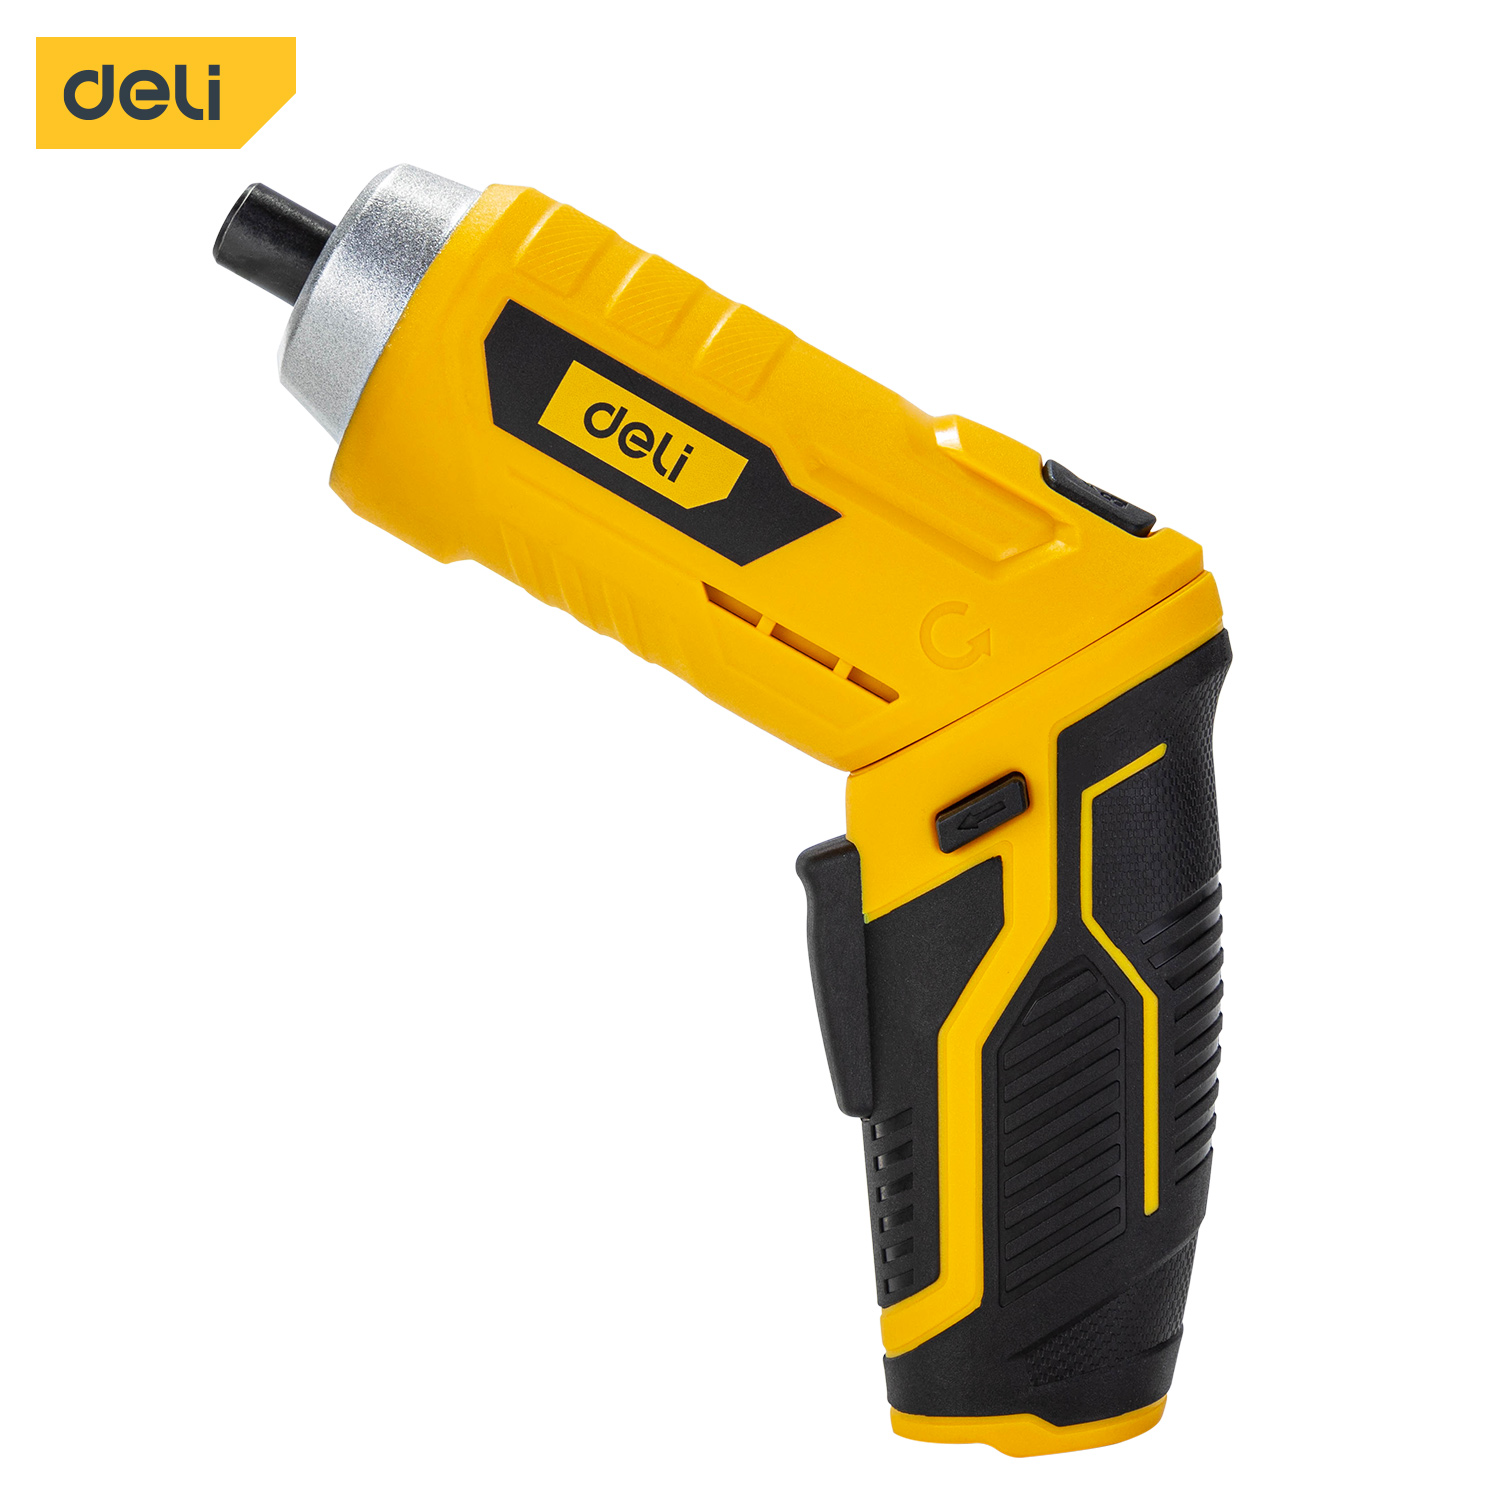 Homebase Quiet Cordless Screwdriver For Tight Spaces